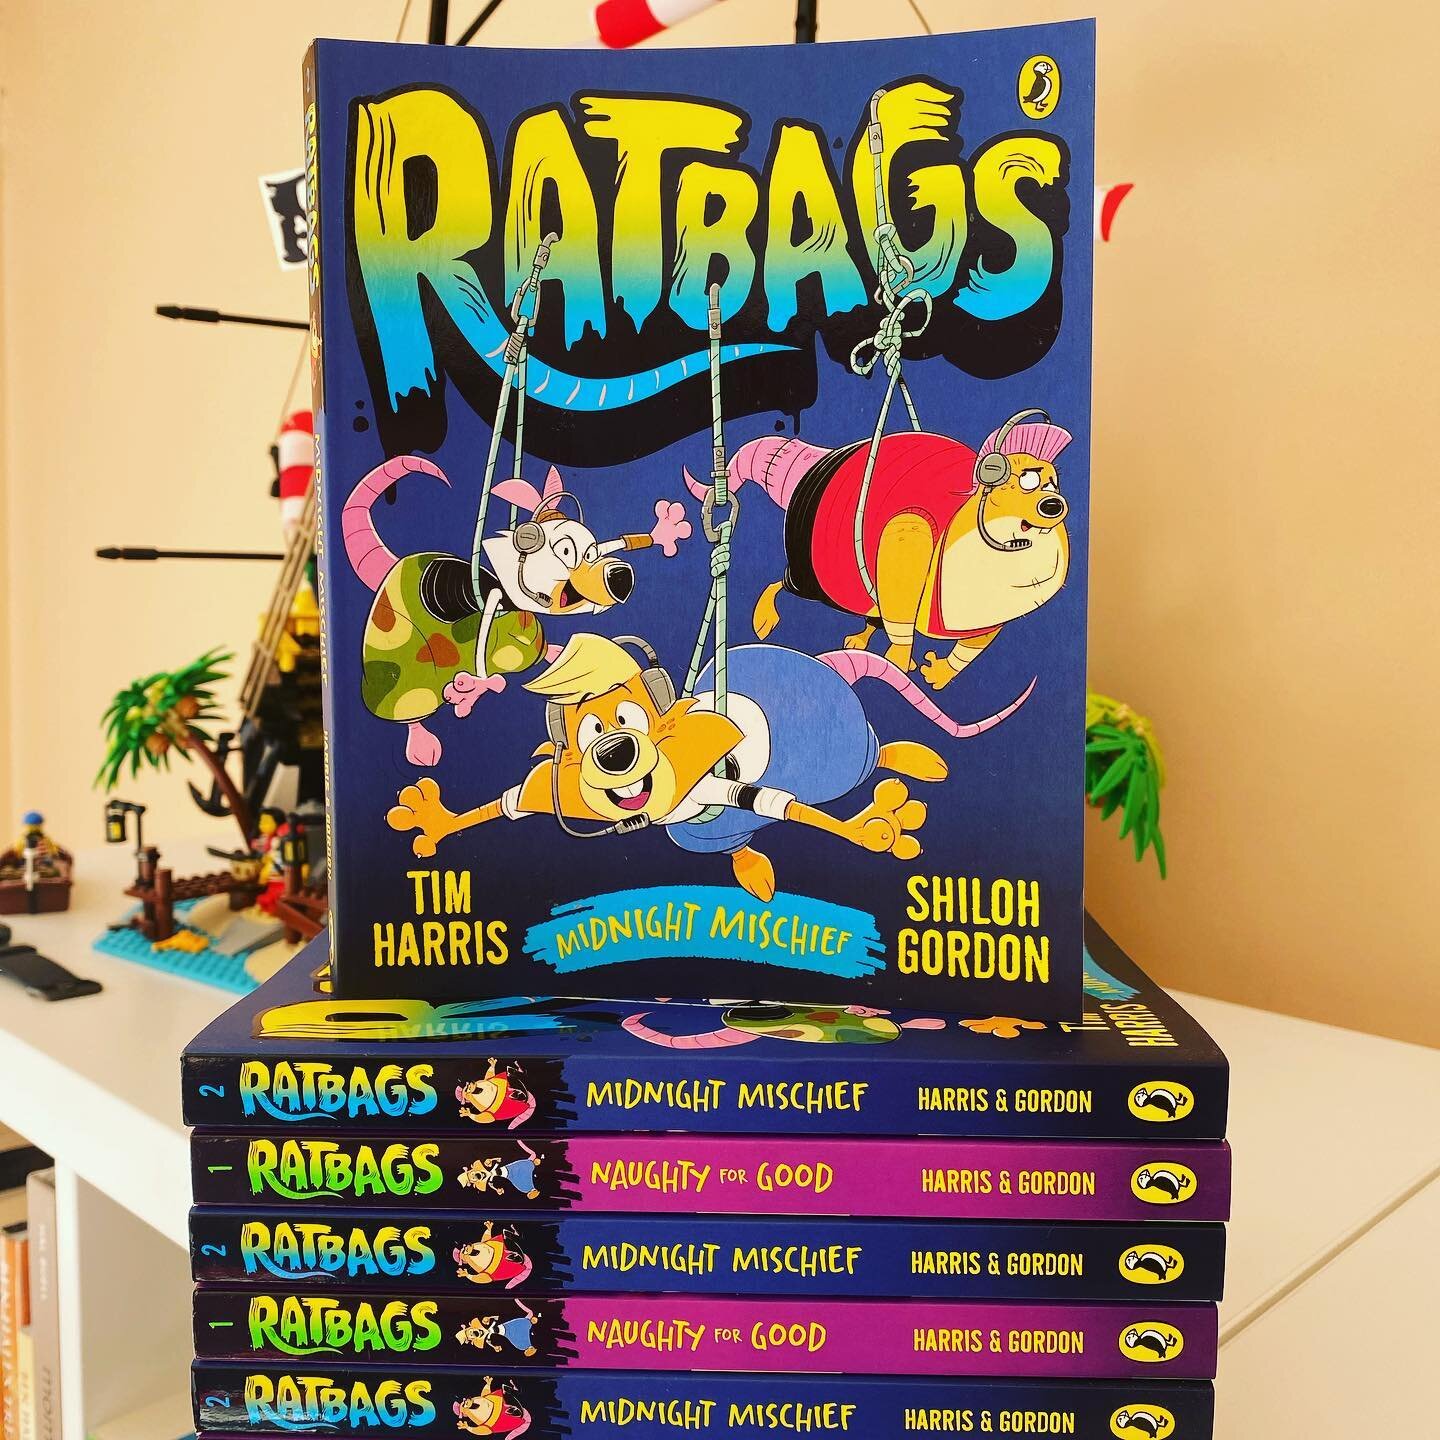 Ratbags: Midnight Mischief is out now. This series was oddly inspired by a title idea. The basic concept was to take the colloquial term and apply it literally to rats. Fun fact: finding the right voice for the series took about 18 months after the i